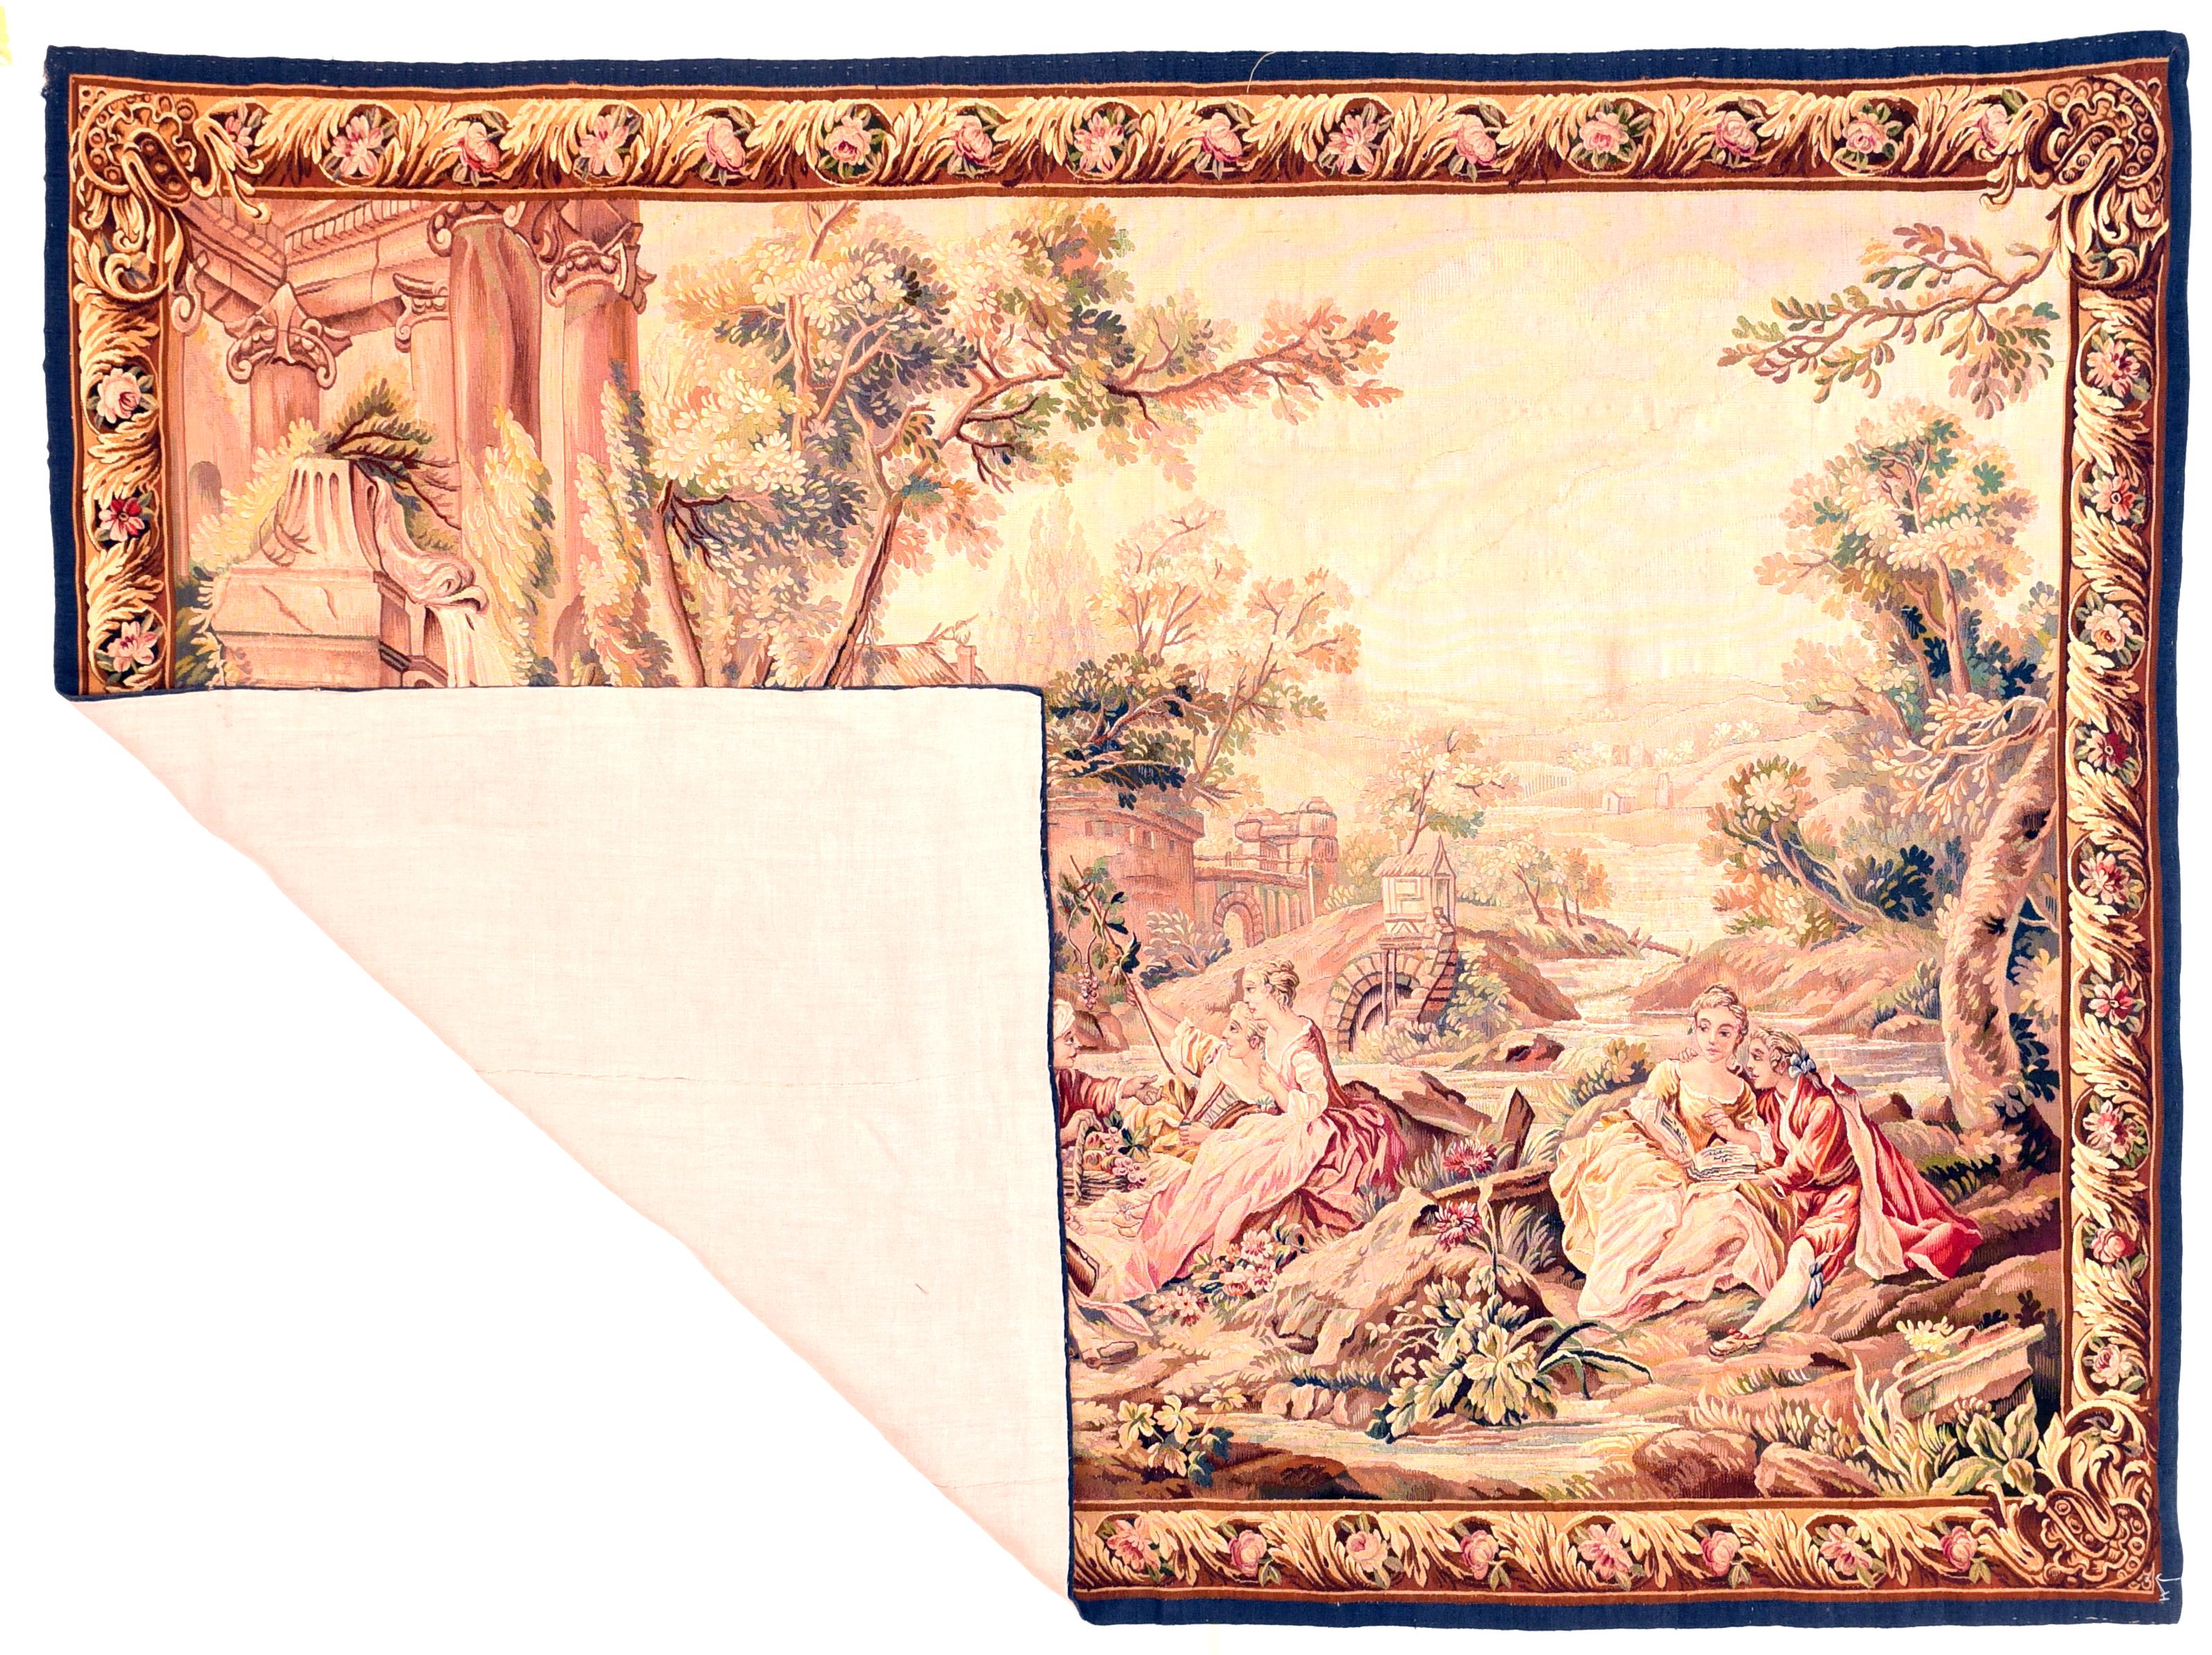 Extremely fine antique Aubusson-Beauvais pictorial French tapestry, hand knotted, circa 19th century

Story: Love Scene

The Aubusson tapestry manufacture of the 17th and 18th centuries managed to compete with the royal manufacture of Gobelins